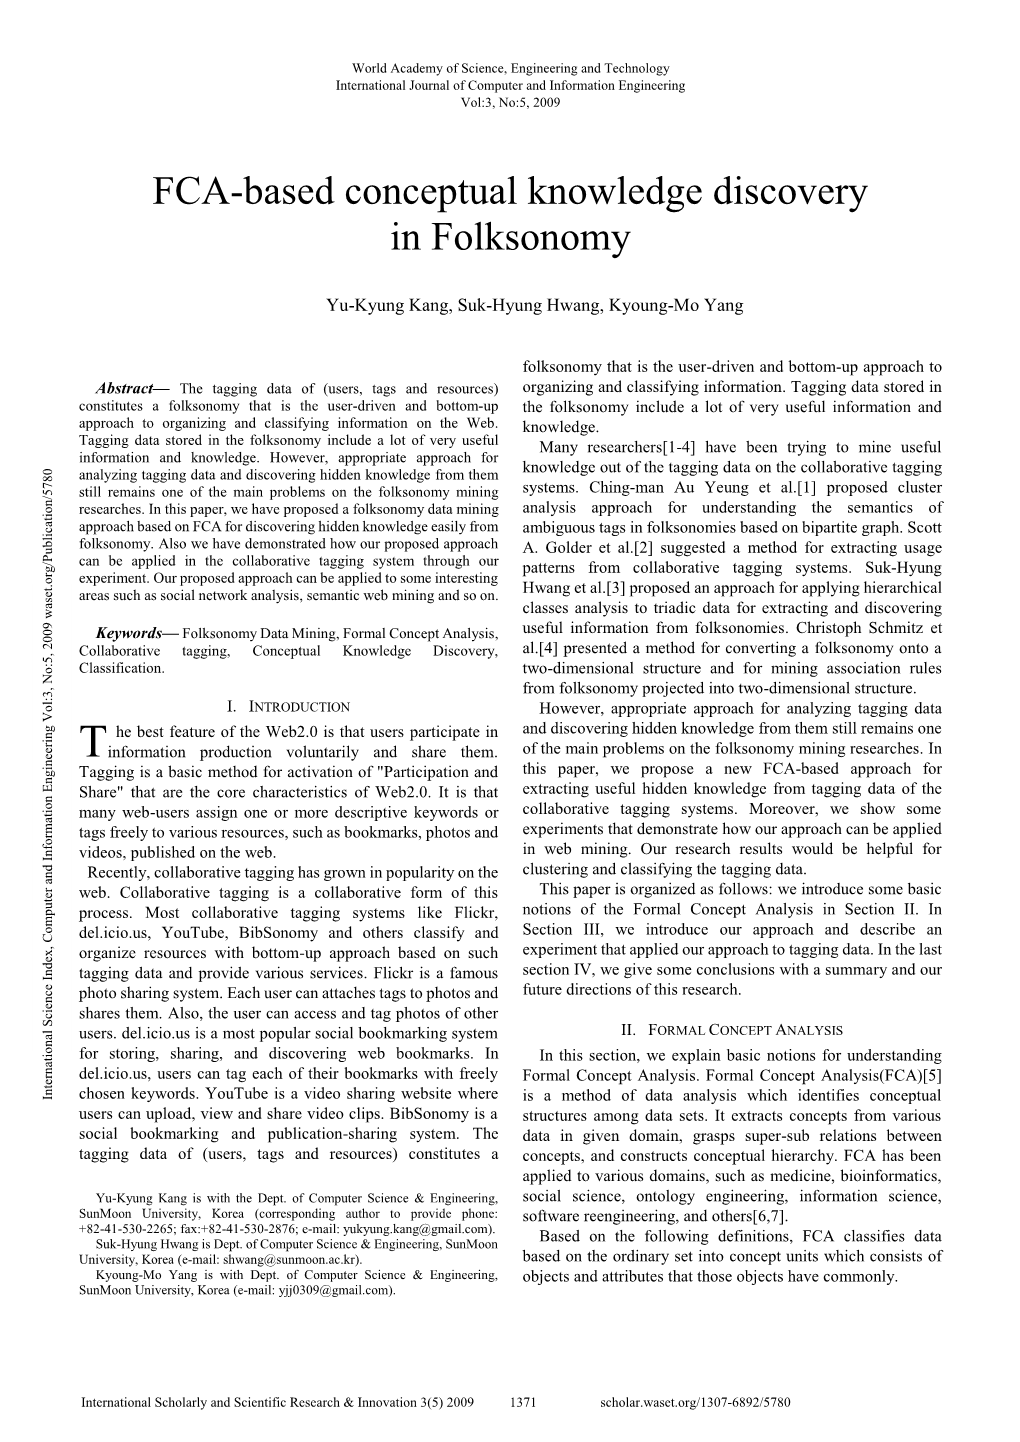 FCA-Based Conceptual Knowledge Discovery in Folksonomy